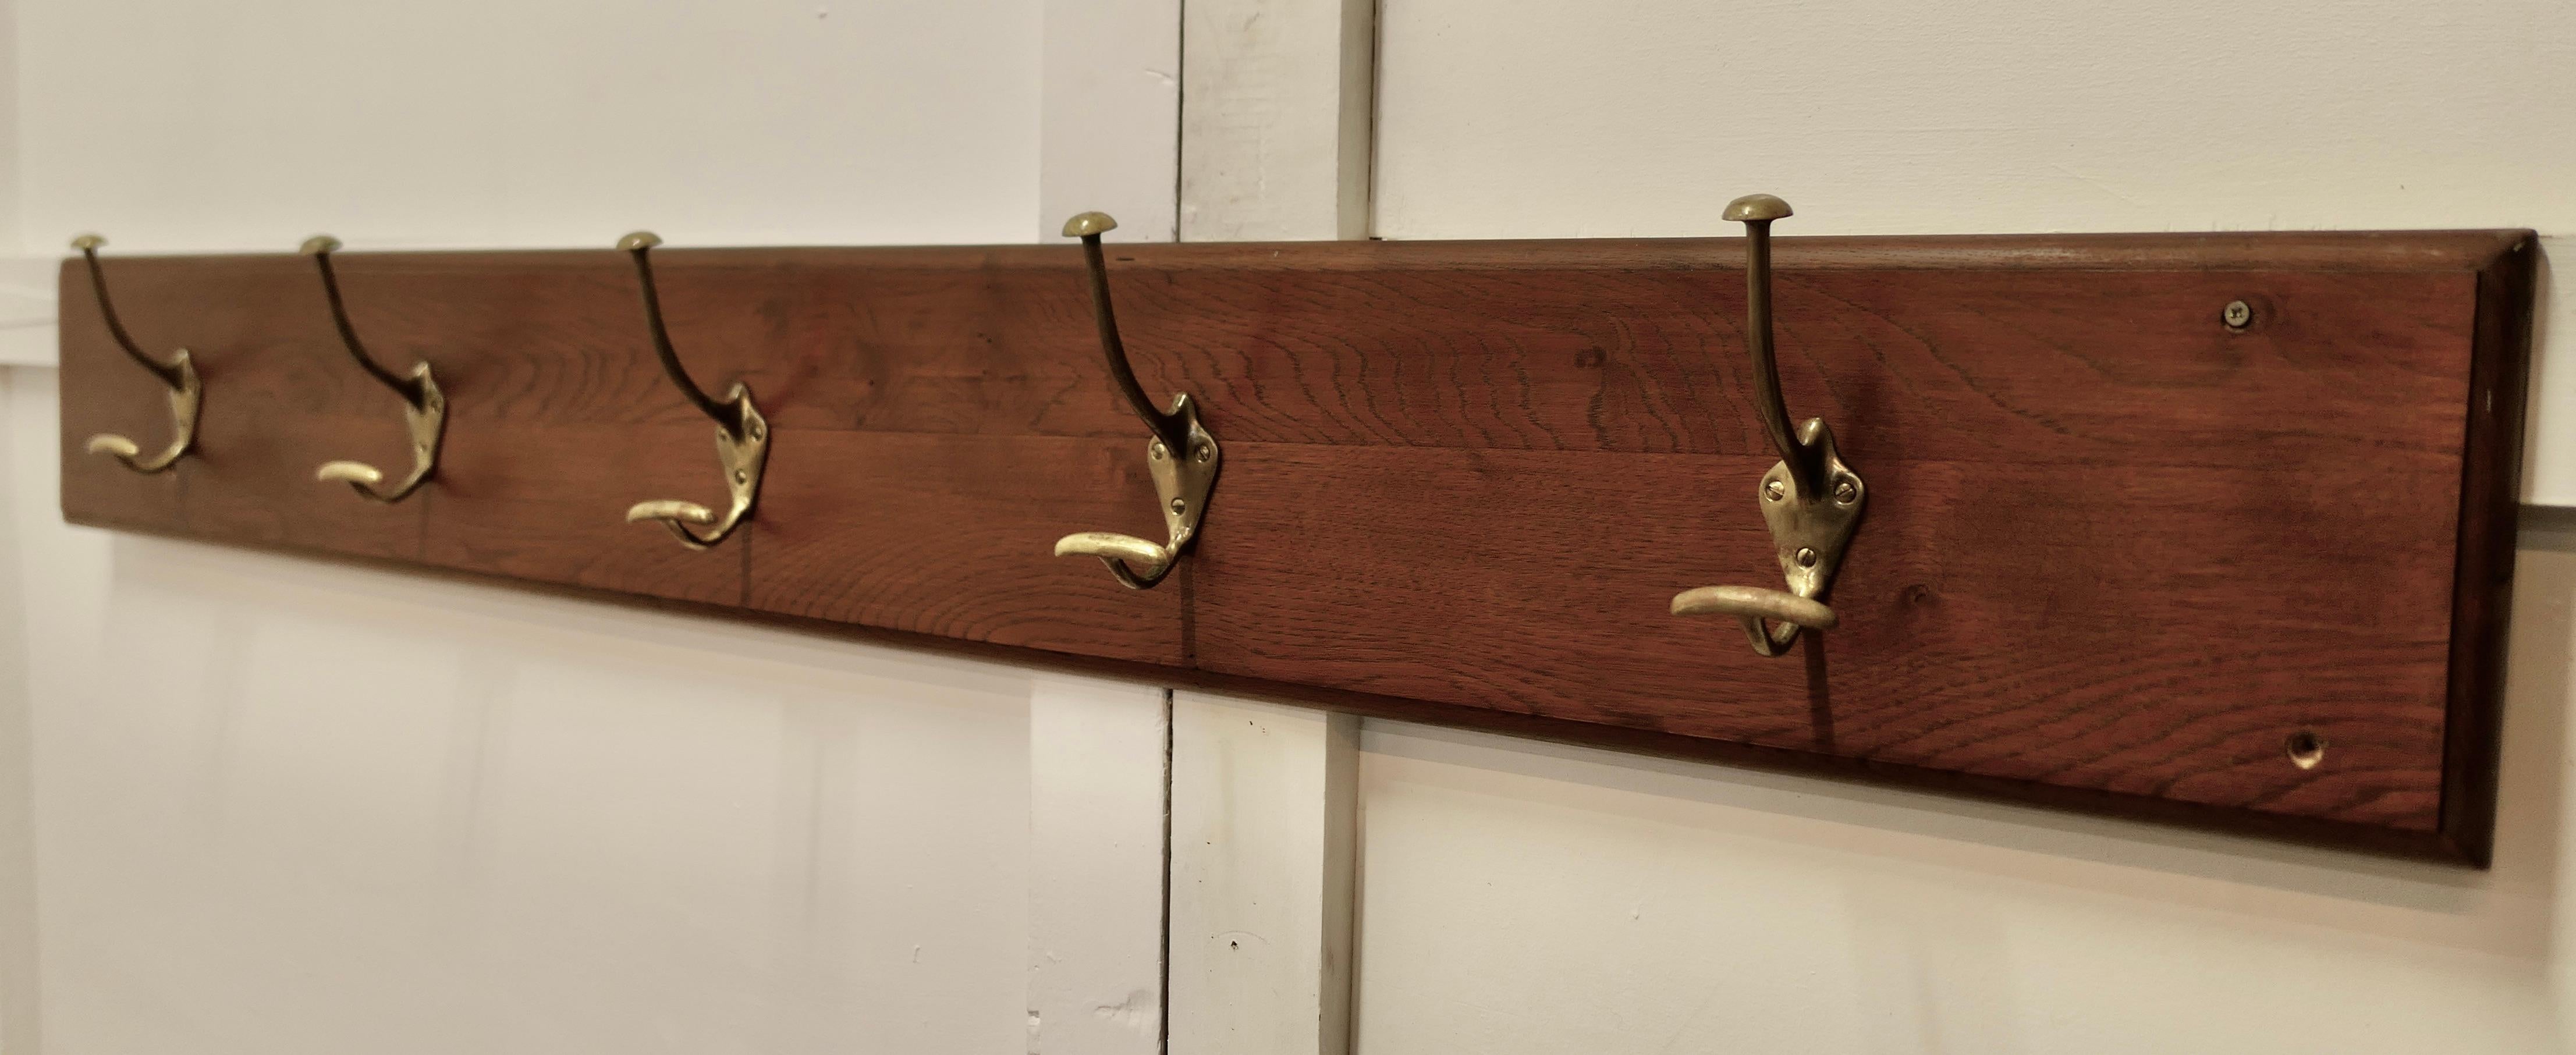 19th century French Long Oak 5 Double Peg Coat Rack

Plain and Simple, a piece of solid oak with 5 large brass Coat pegs on a 72” frame

The rail is 72” long and 9” high 
MS87.